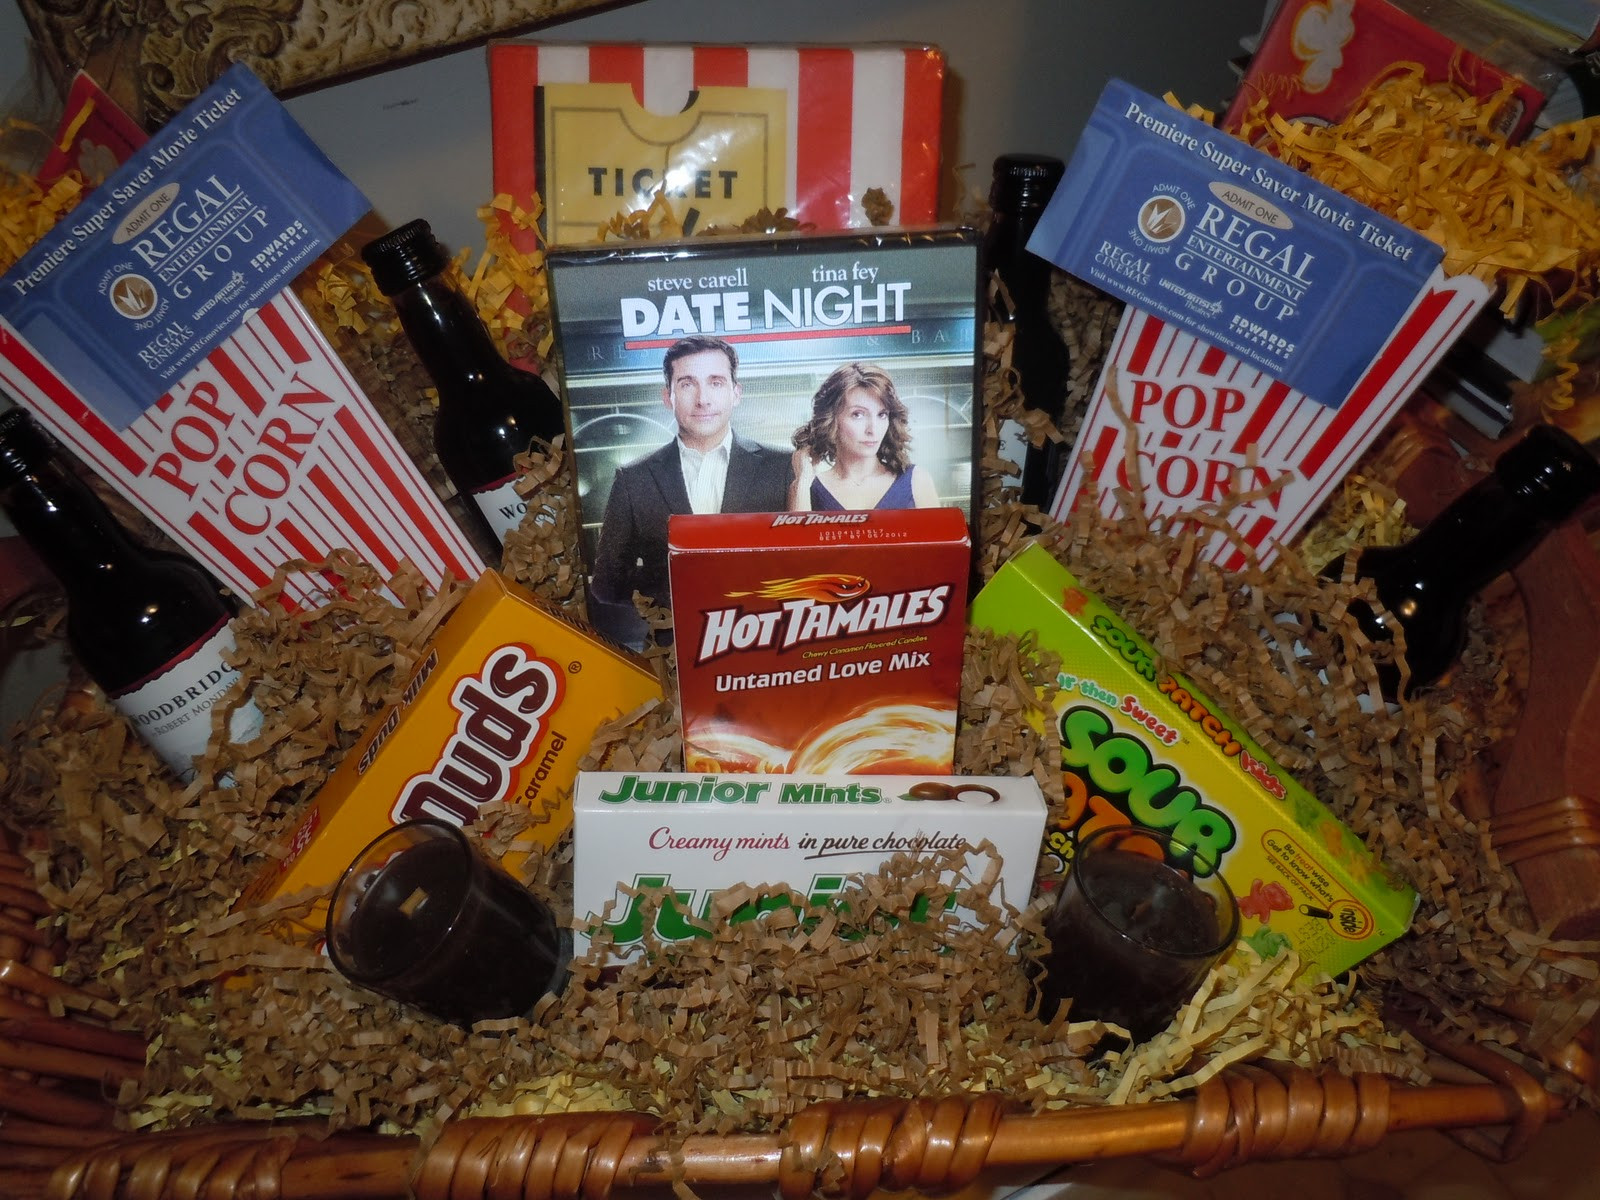 Date Night Gift Basket Ideas
 I Do Declare Gift Idea "Date Night" Gift Basket